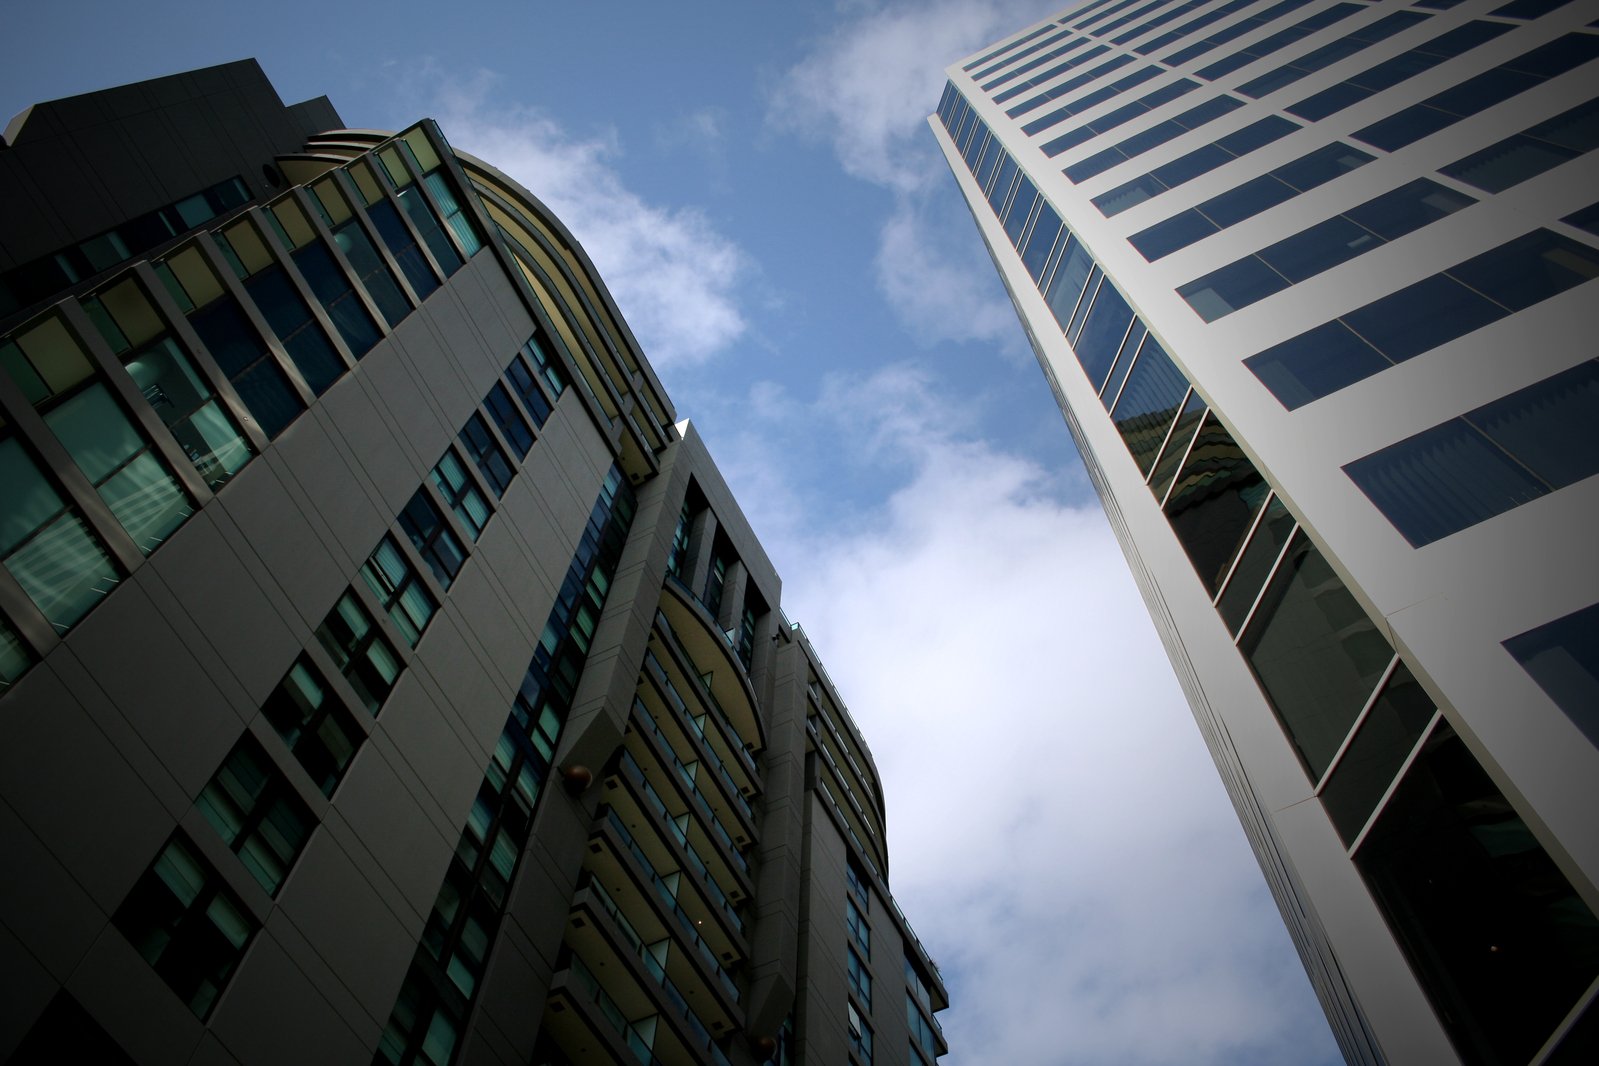 tall buildings with windows and sky view from the ground